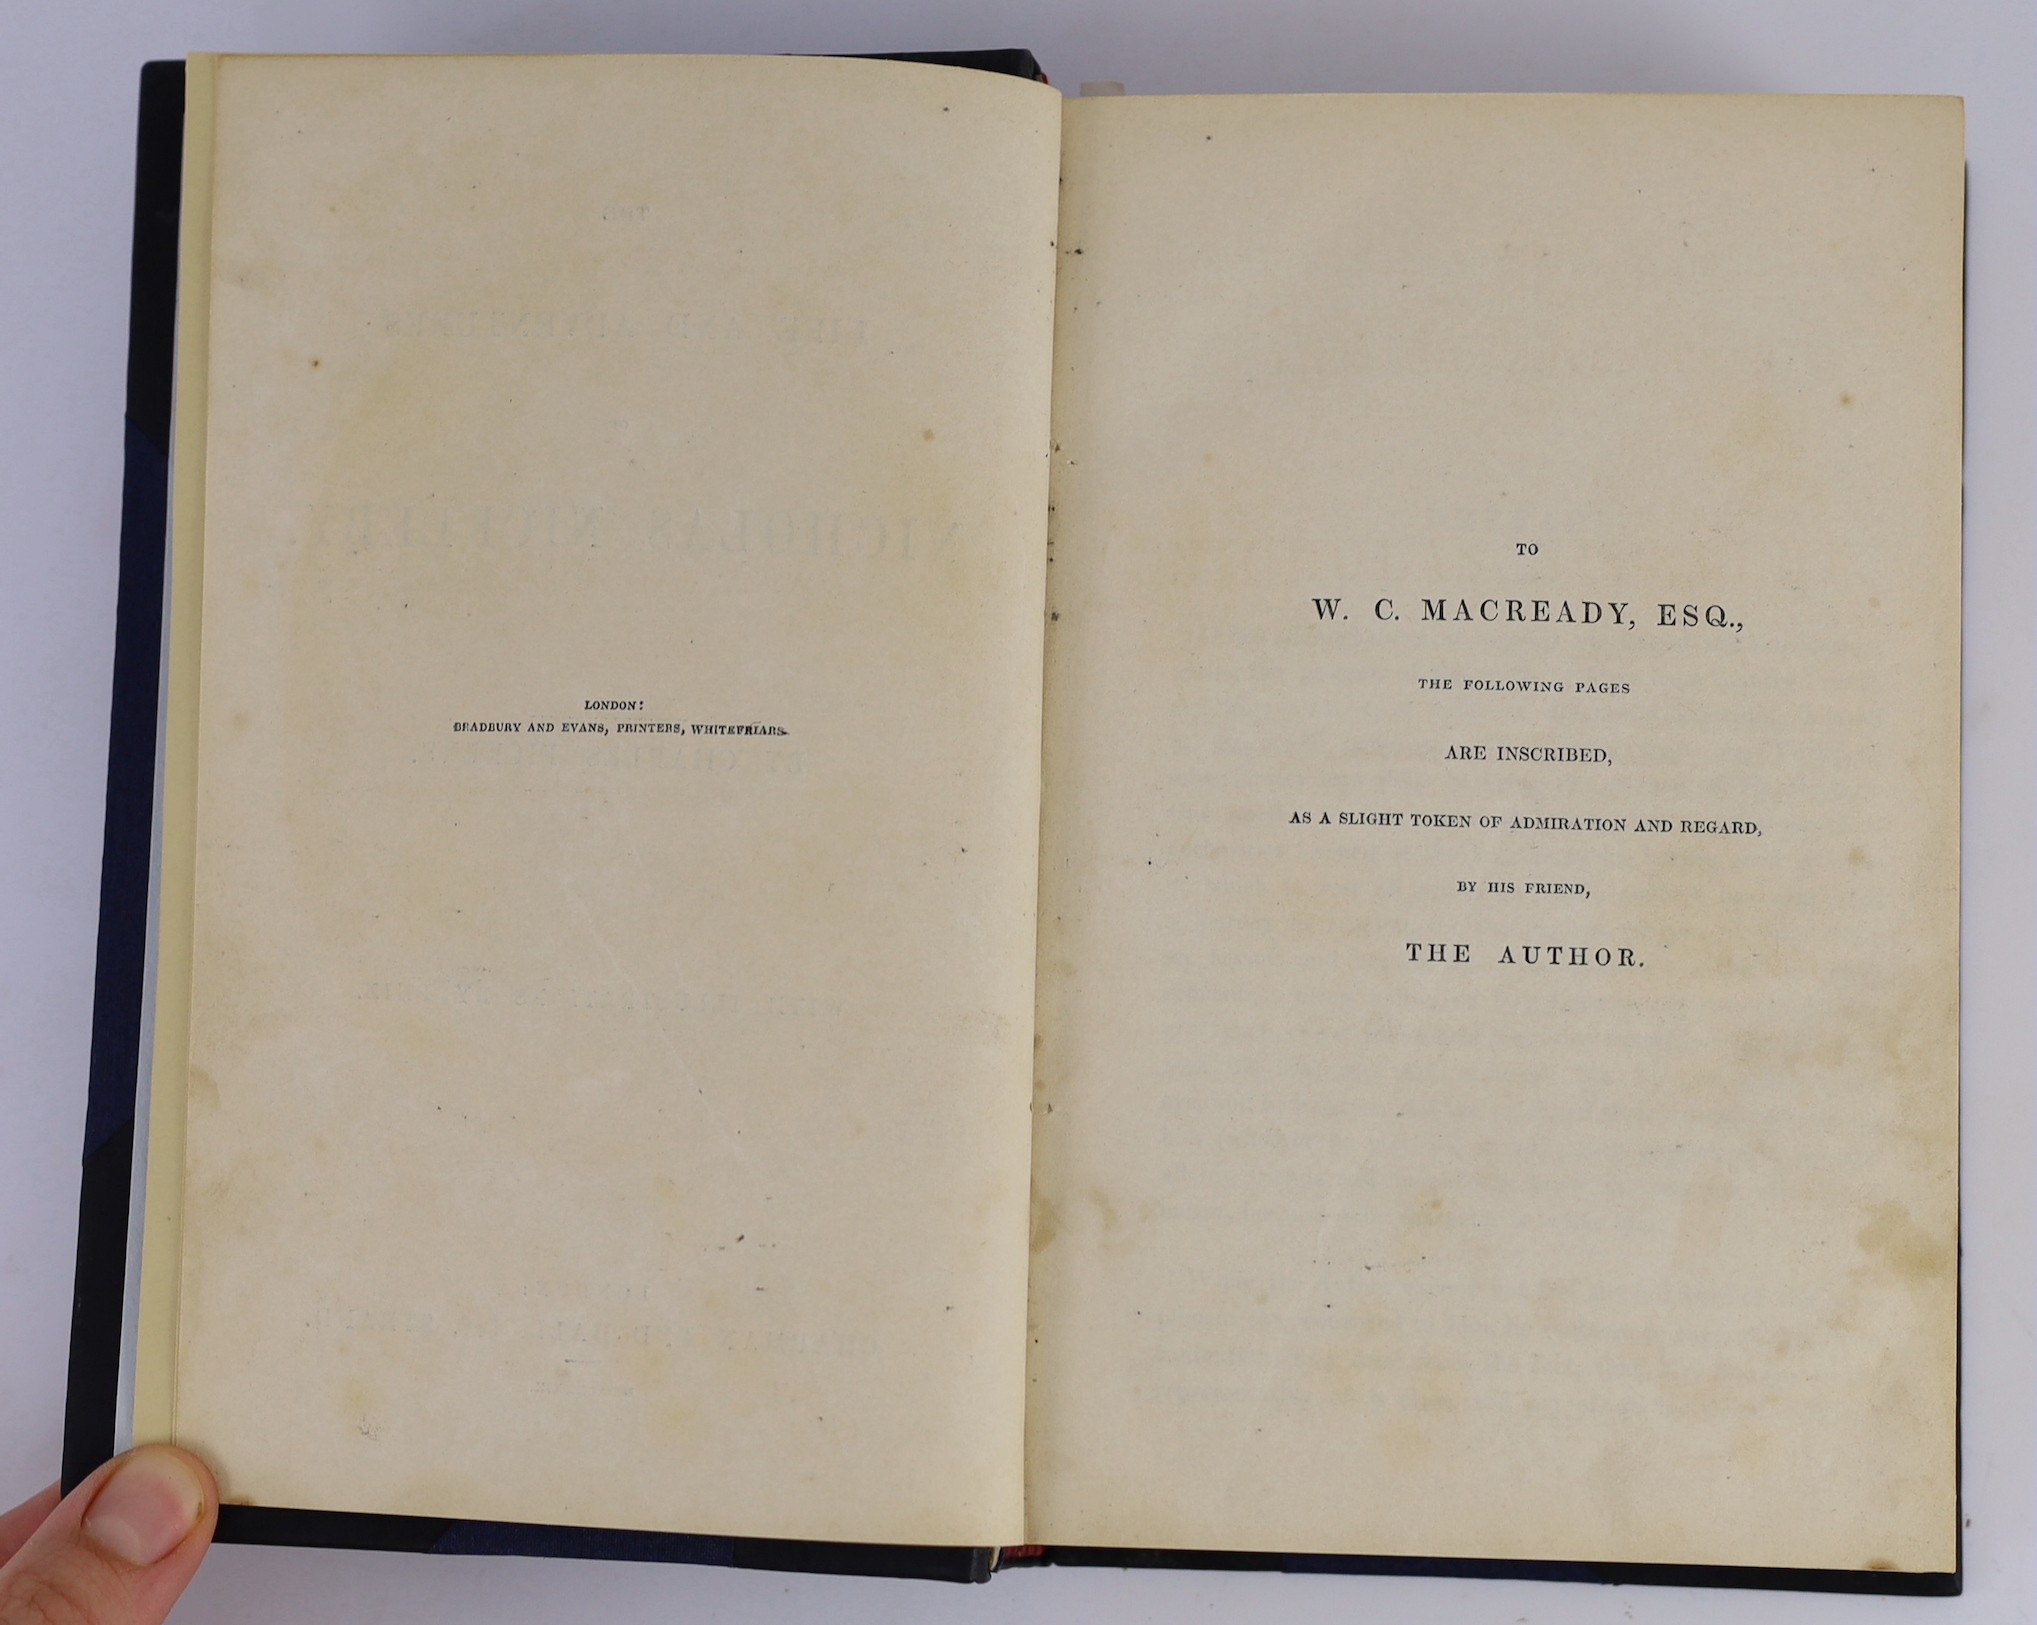 Dickens, Charles - Nicholas Nickleby, 1st edition in book form, 1st state, stab holes present, 8vo, later black calf with blue cloth boards, illustrated with 39 plates by Halbot K.Browne (‘’Phiz’’), neat repair to torn p